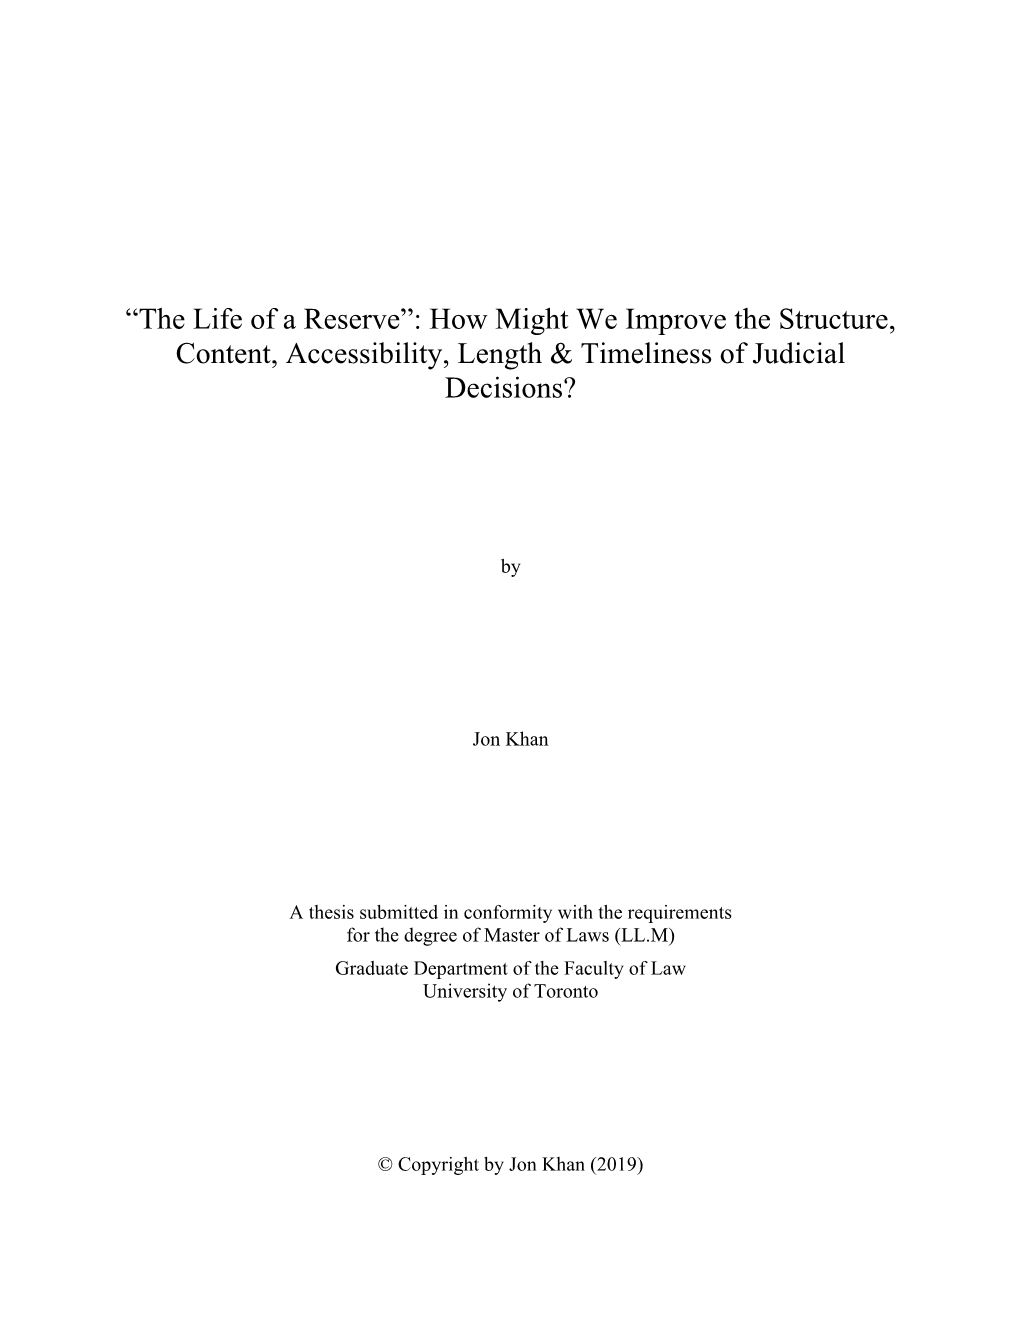 Thesis Submitted in Conformity with the Requirements for the Degree of Master of Laws (LL.M) Graduate Department of the Faculty of Law University of Toronto